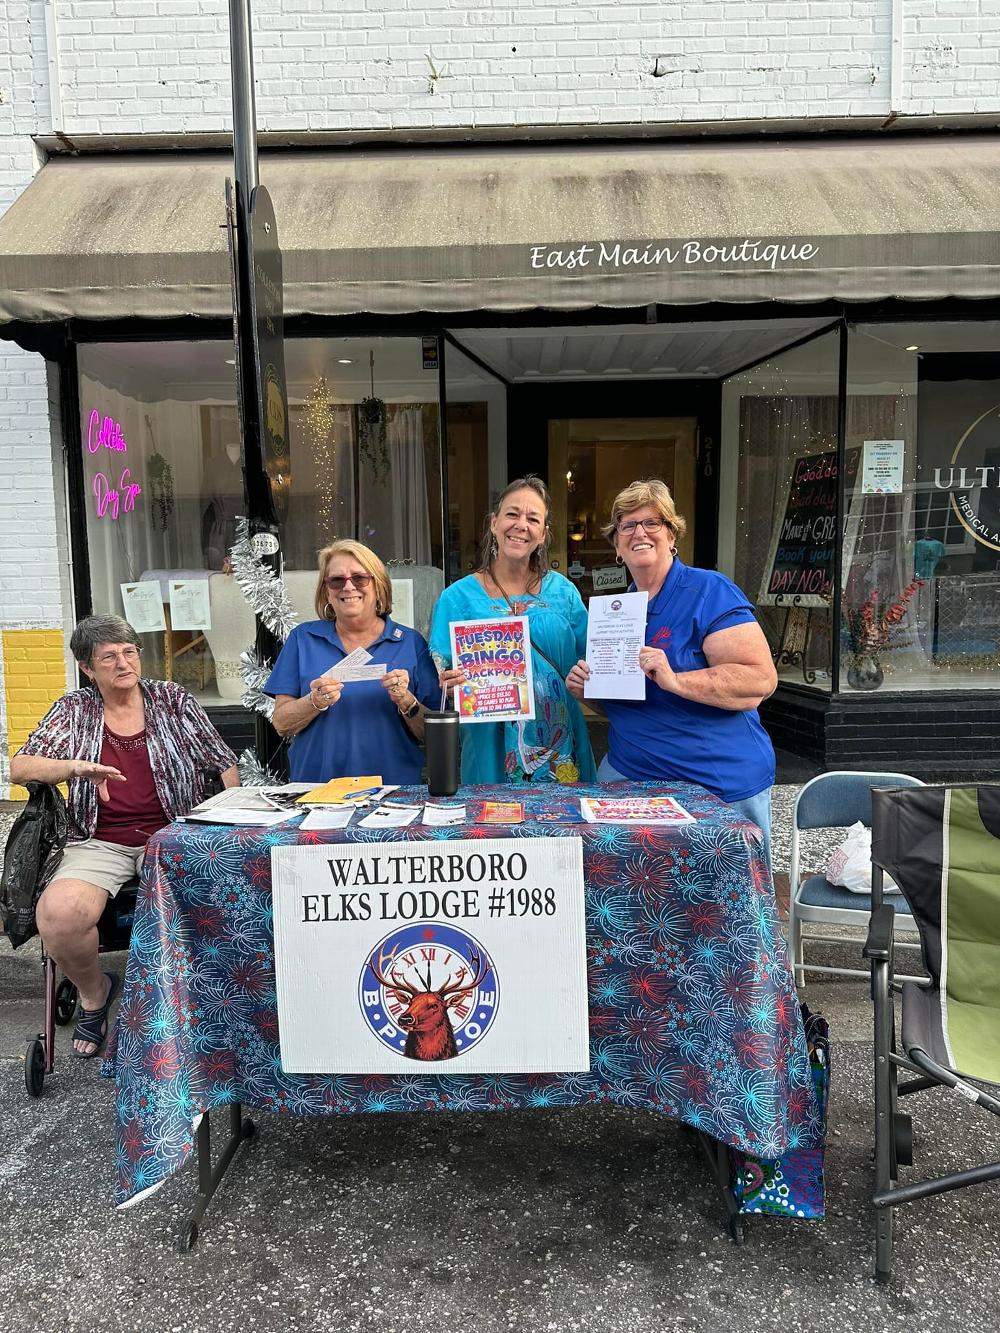 We are at Downtown Walterboro’s First Thursday in front of Colleton Day Spa. Come by and say “hi” if you’re in the area. We have shoot out tickets too!